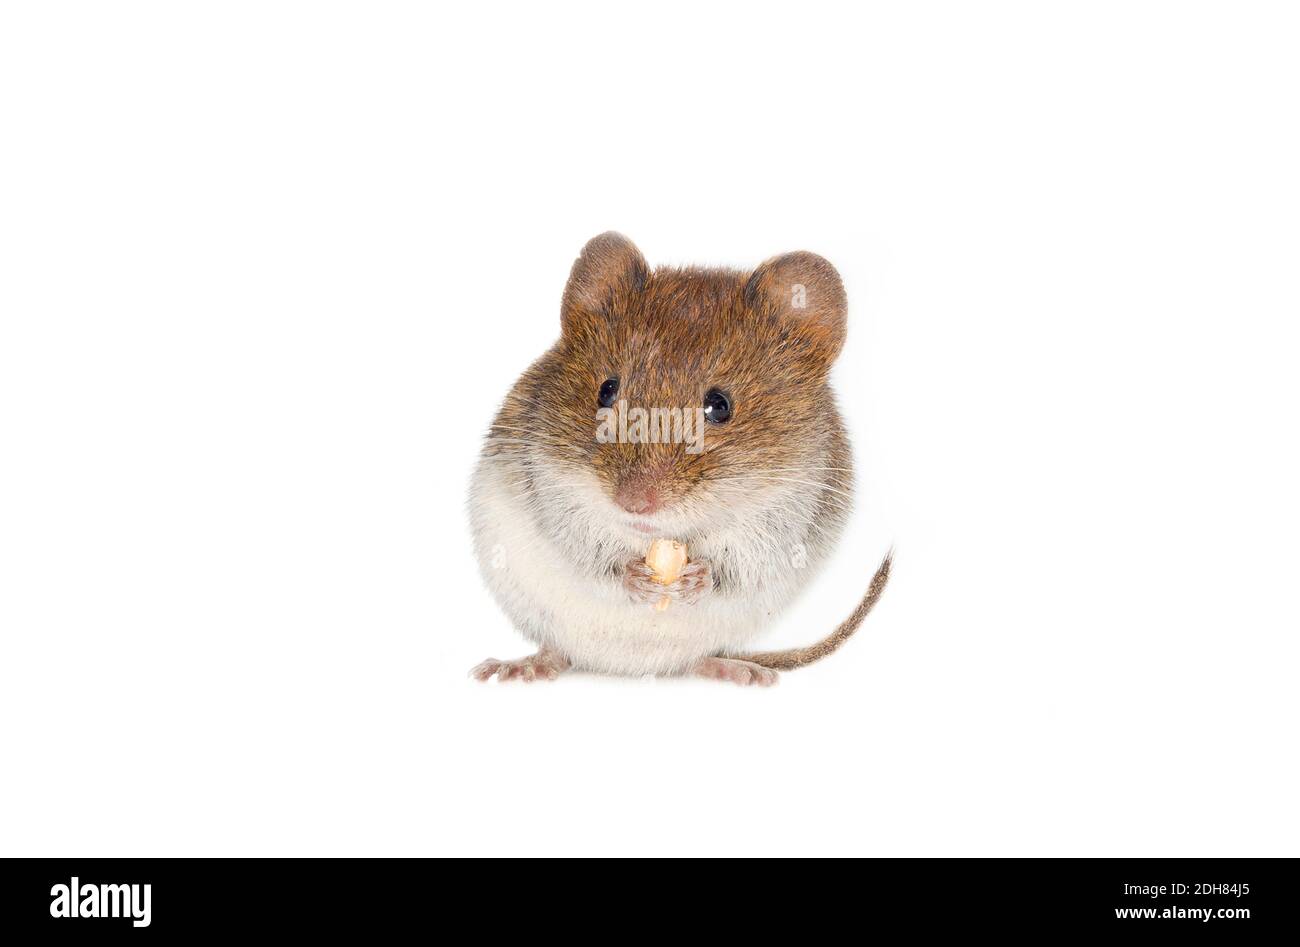 field vole, short-tailed vole (Microtus agrestis), feeding, cut-out, Netherlands Antilles Stock Photo